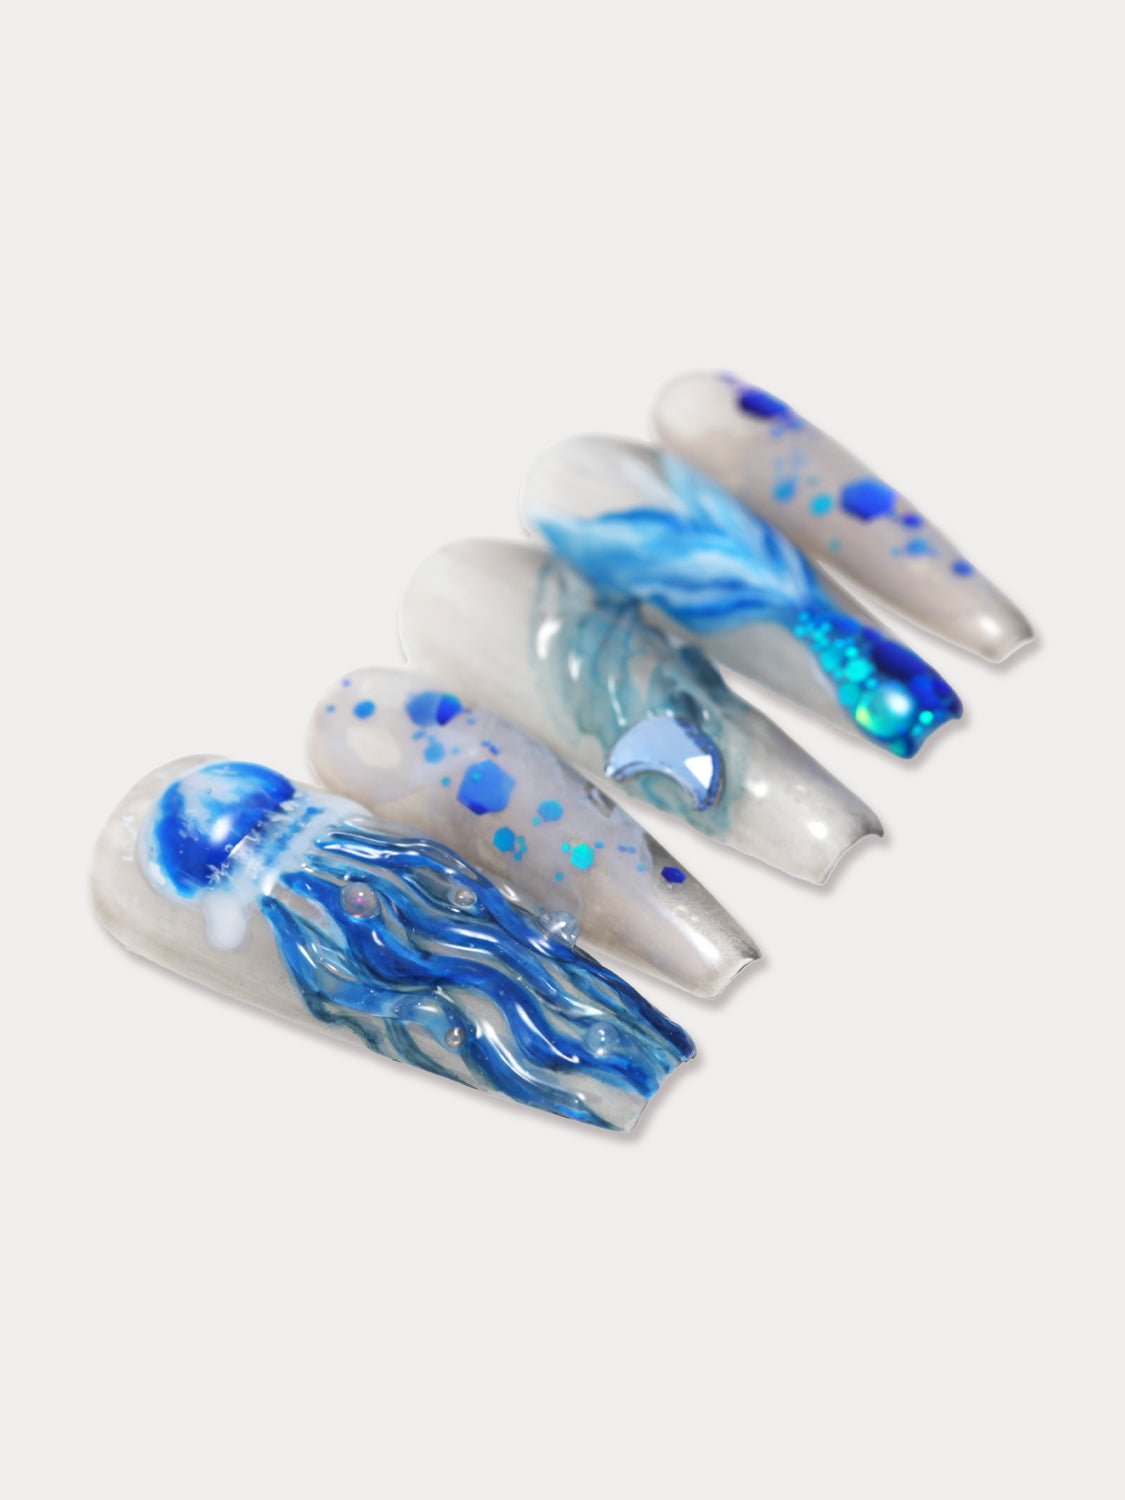 MIEAP 3D Jellyfish press on nail set features handcrafted 3D jellyfish and mermaid tail designs. The nails are embellished with unique blue glitter, creating a shimmering effect reminiscent of the sparkling ocean under sunlight. #MIEAP #MIEAPnails #pressonnail #falsenail #acrylicnail #nails #nailart #naildesign #nailinspo #handmadenail #summernail #nail2023 #graduationnail #luxurynail #longnail #coffinnail #3Dnail #datingnail #promnail